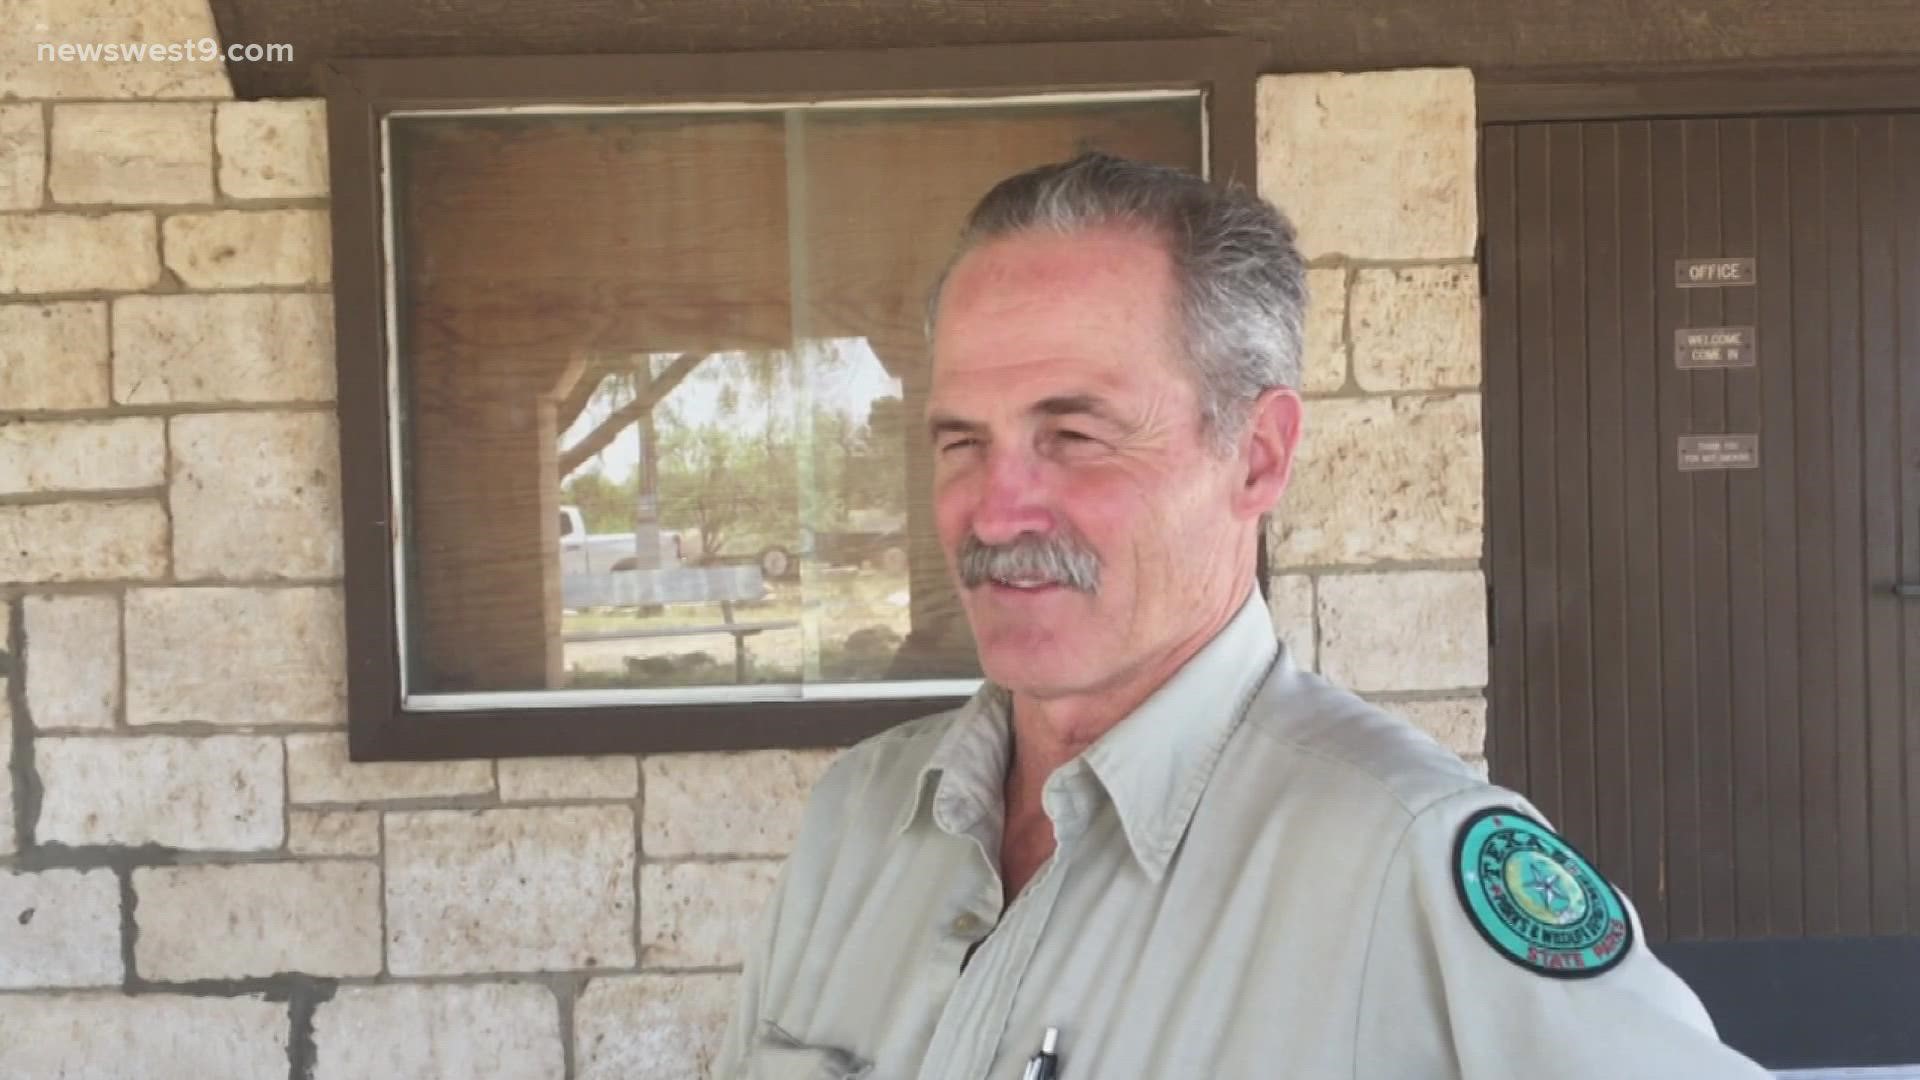 Ron Alton moved to Big Spring in 1992 and became the Big Spring State Park Manager for nearly three decades.